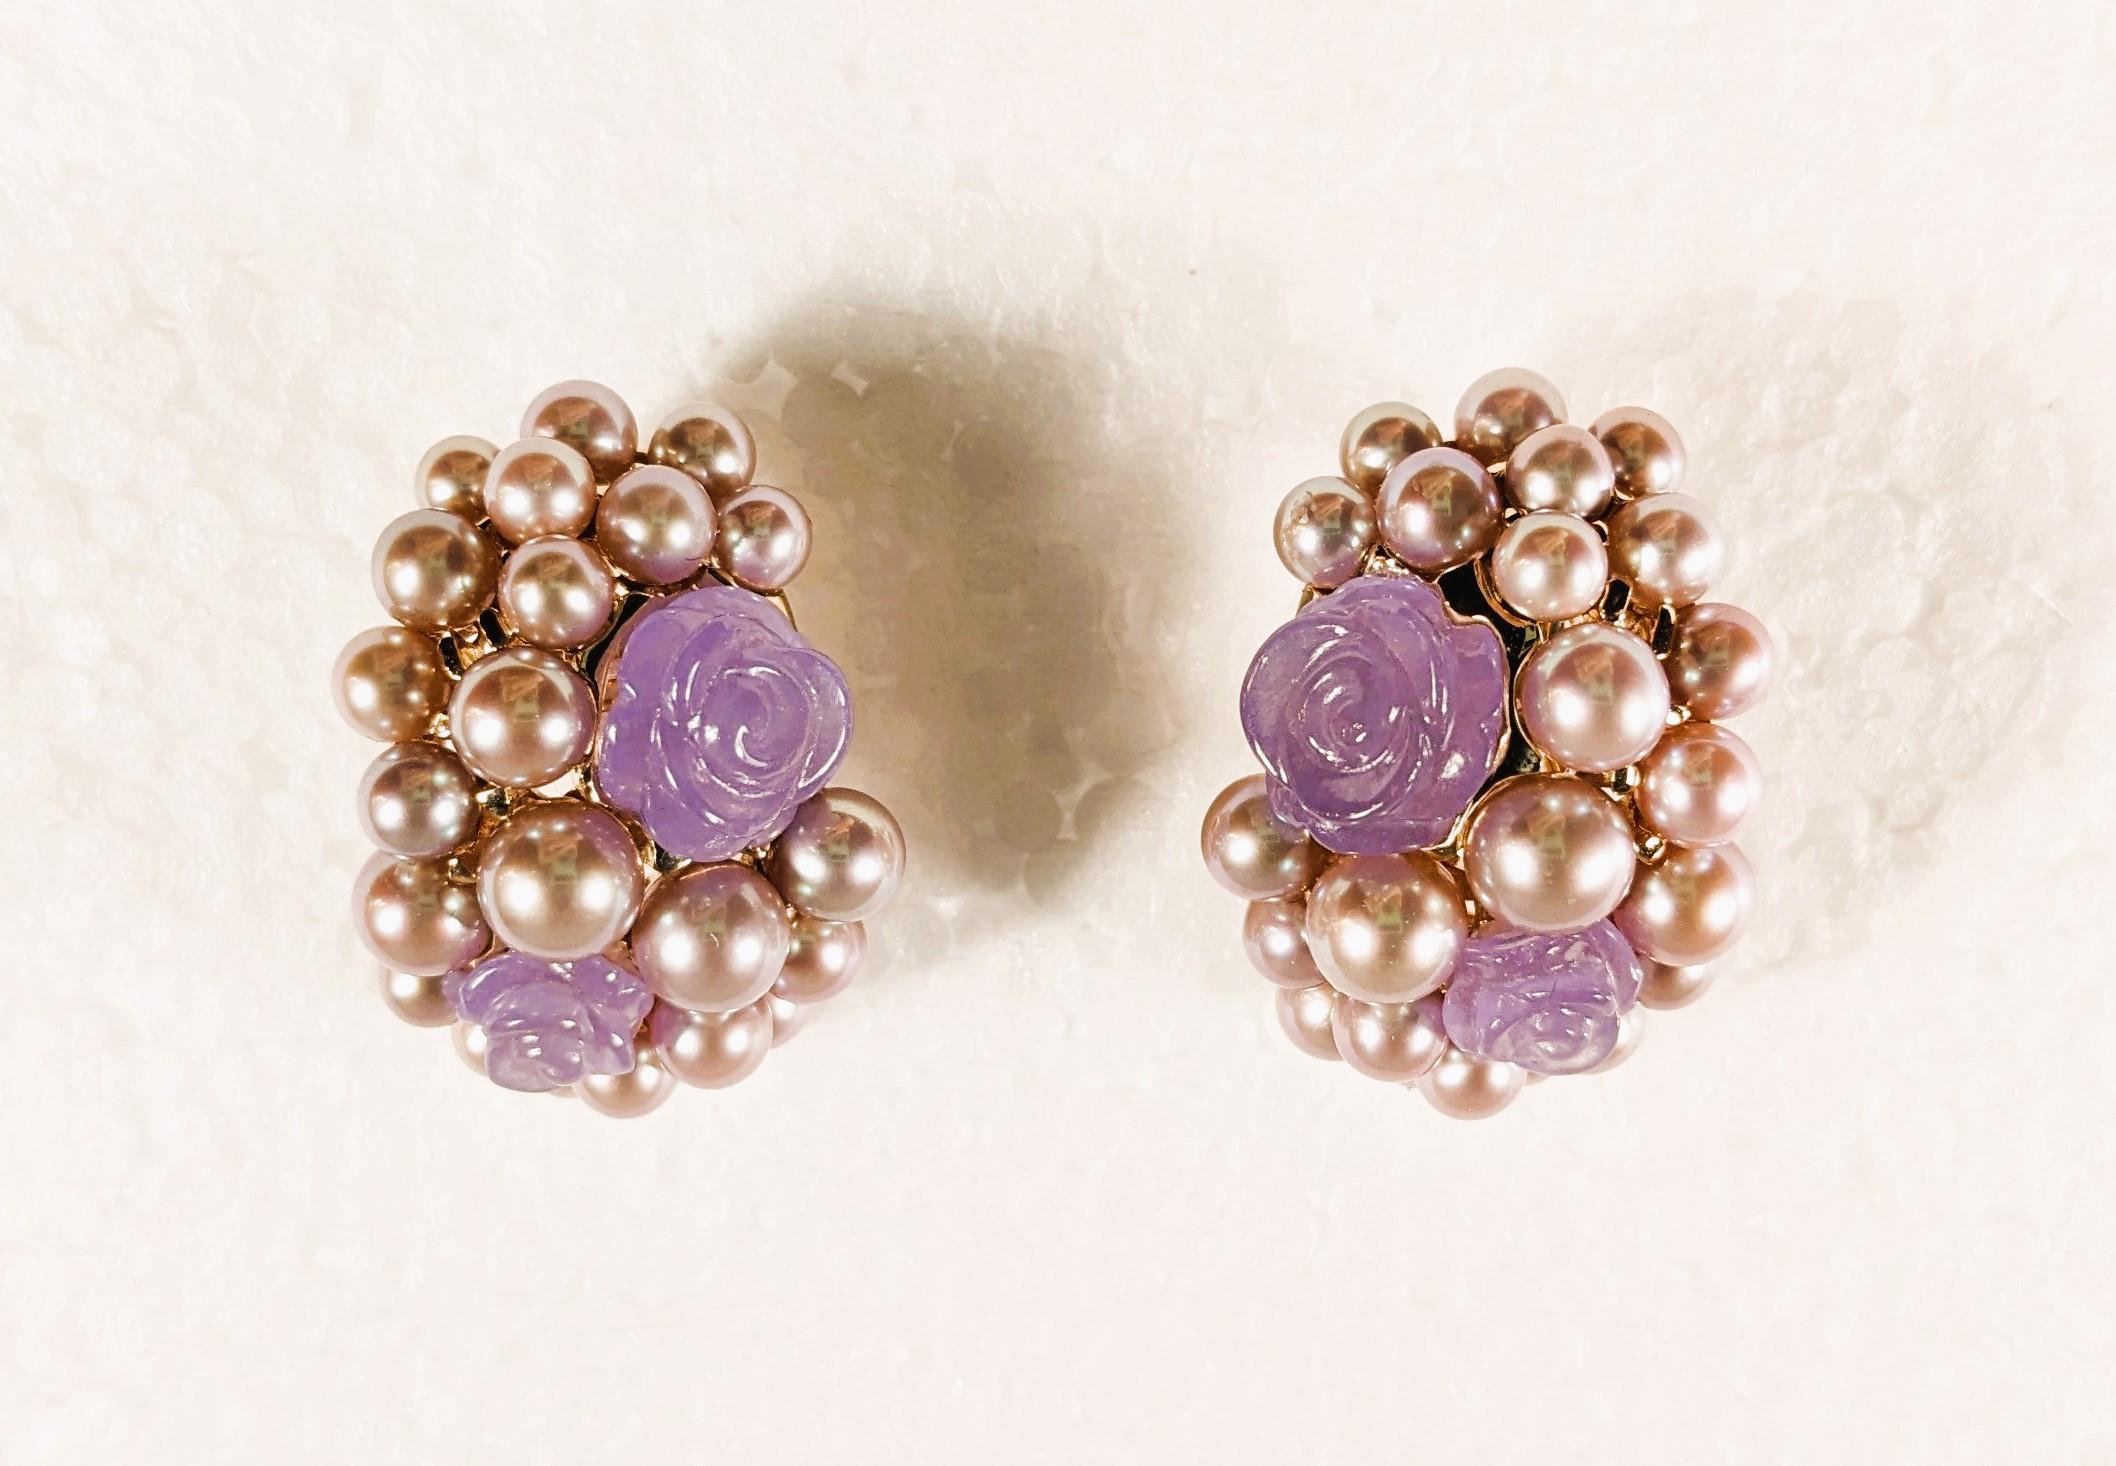 A fabulous Clío earrings by Mimi Milano featuring a nest of white and lustreous cultivated pearls with agate flowers in clip on magnificient manufactured 18k rose gold.
Genuine, spontaneous, witty. Simply MIMI, simply feminine. Jewelry that